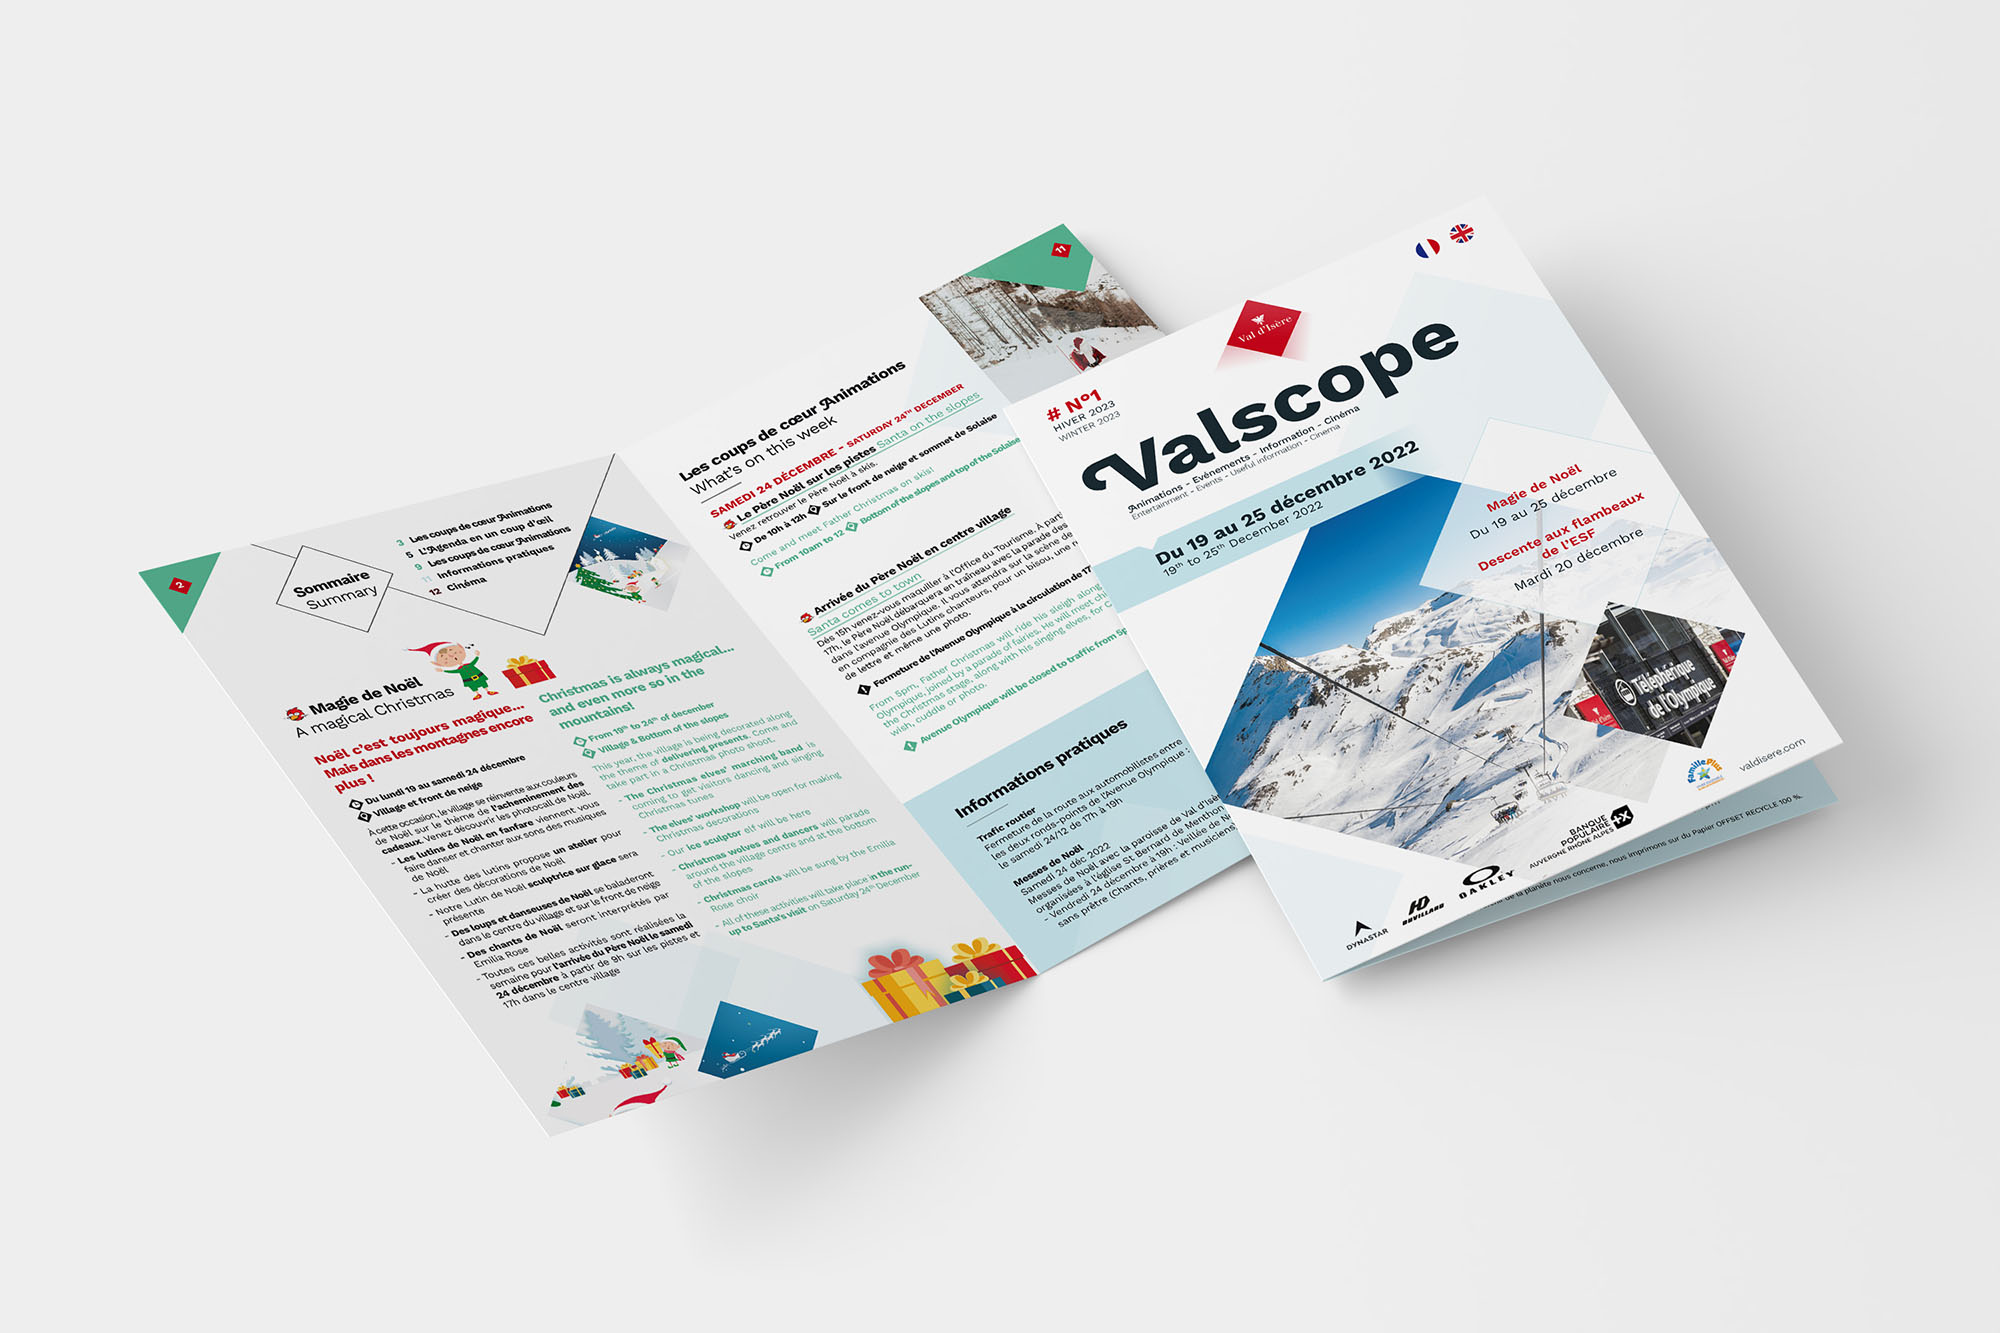 Support-Imprime-Val-Isere-Valscope